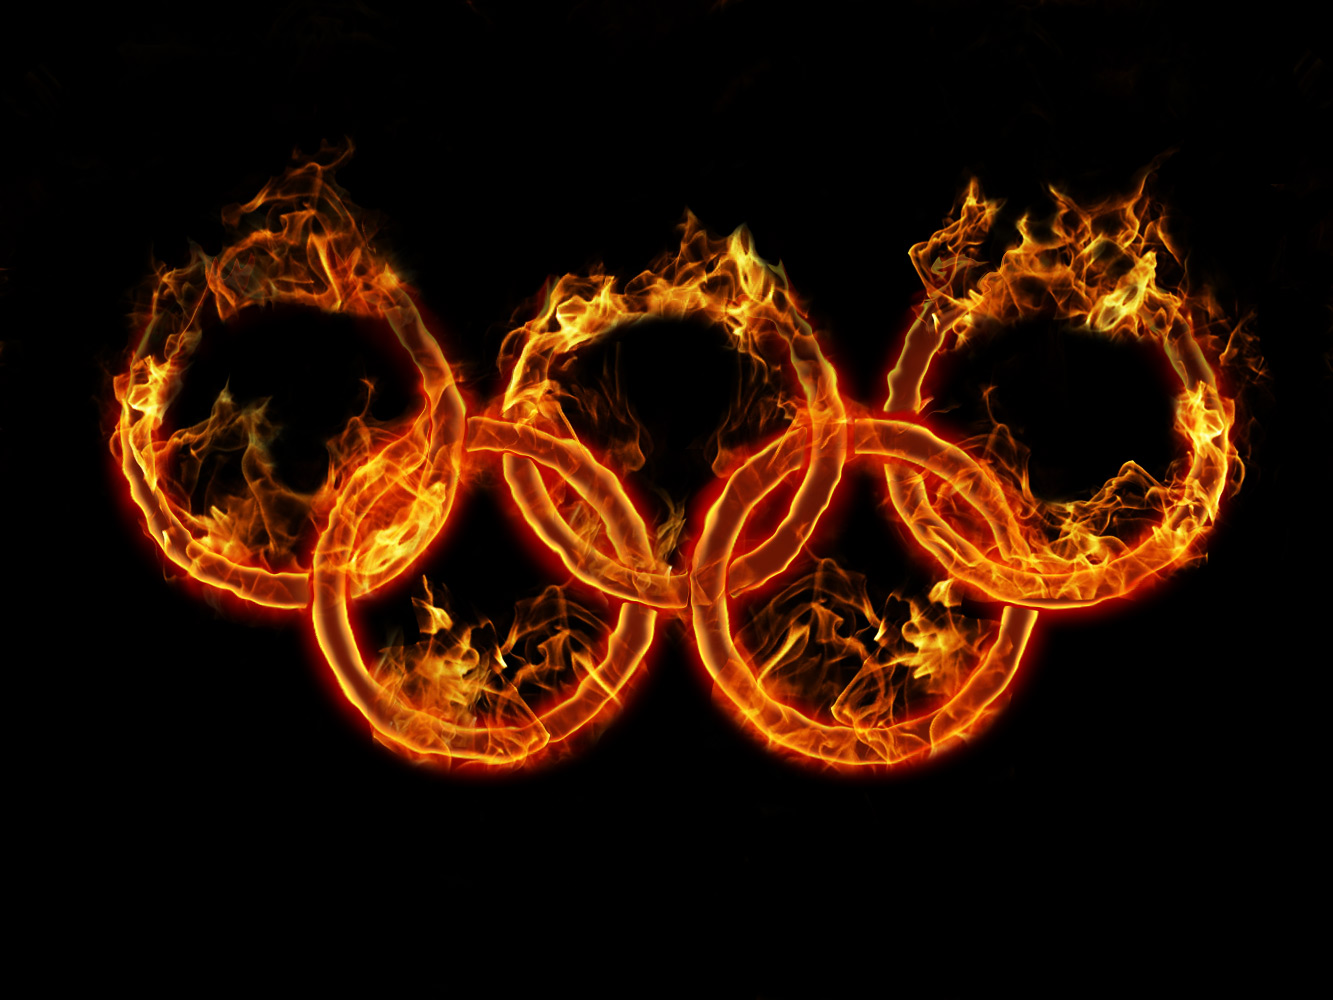 http://www.bing.com/images/search?q=aros+olimpicos&FORM=HDRSC2